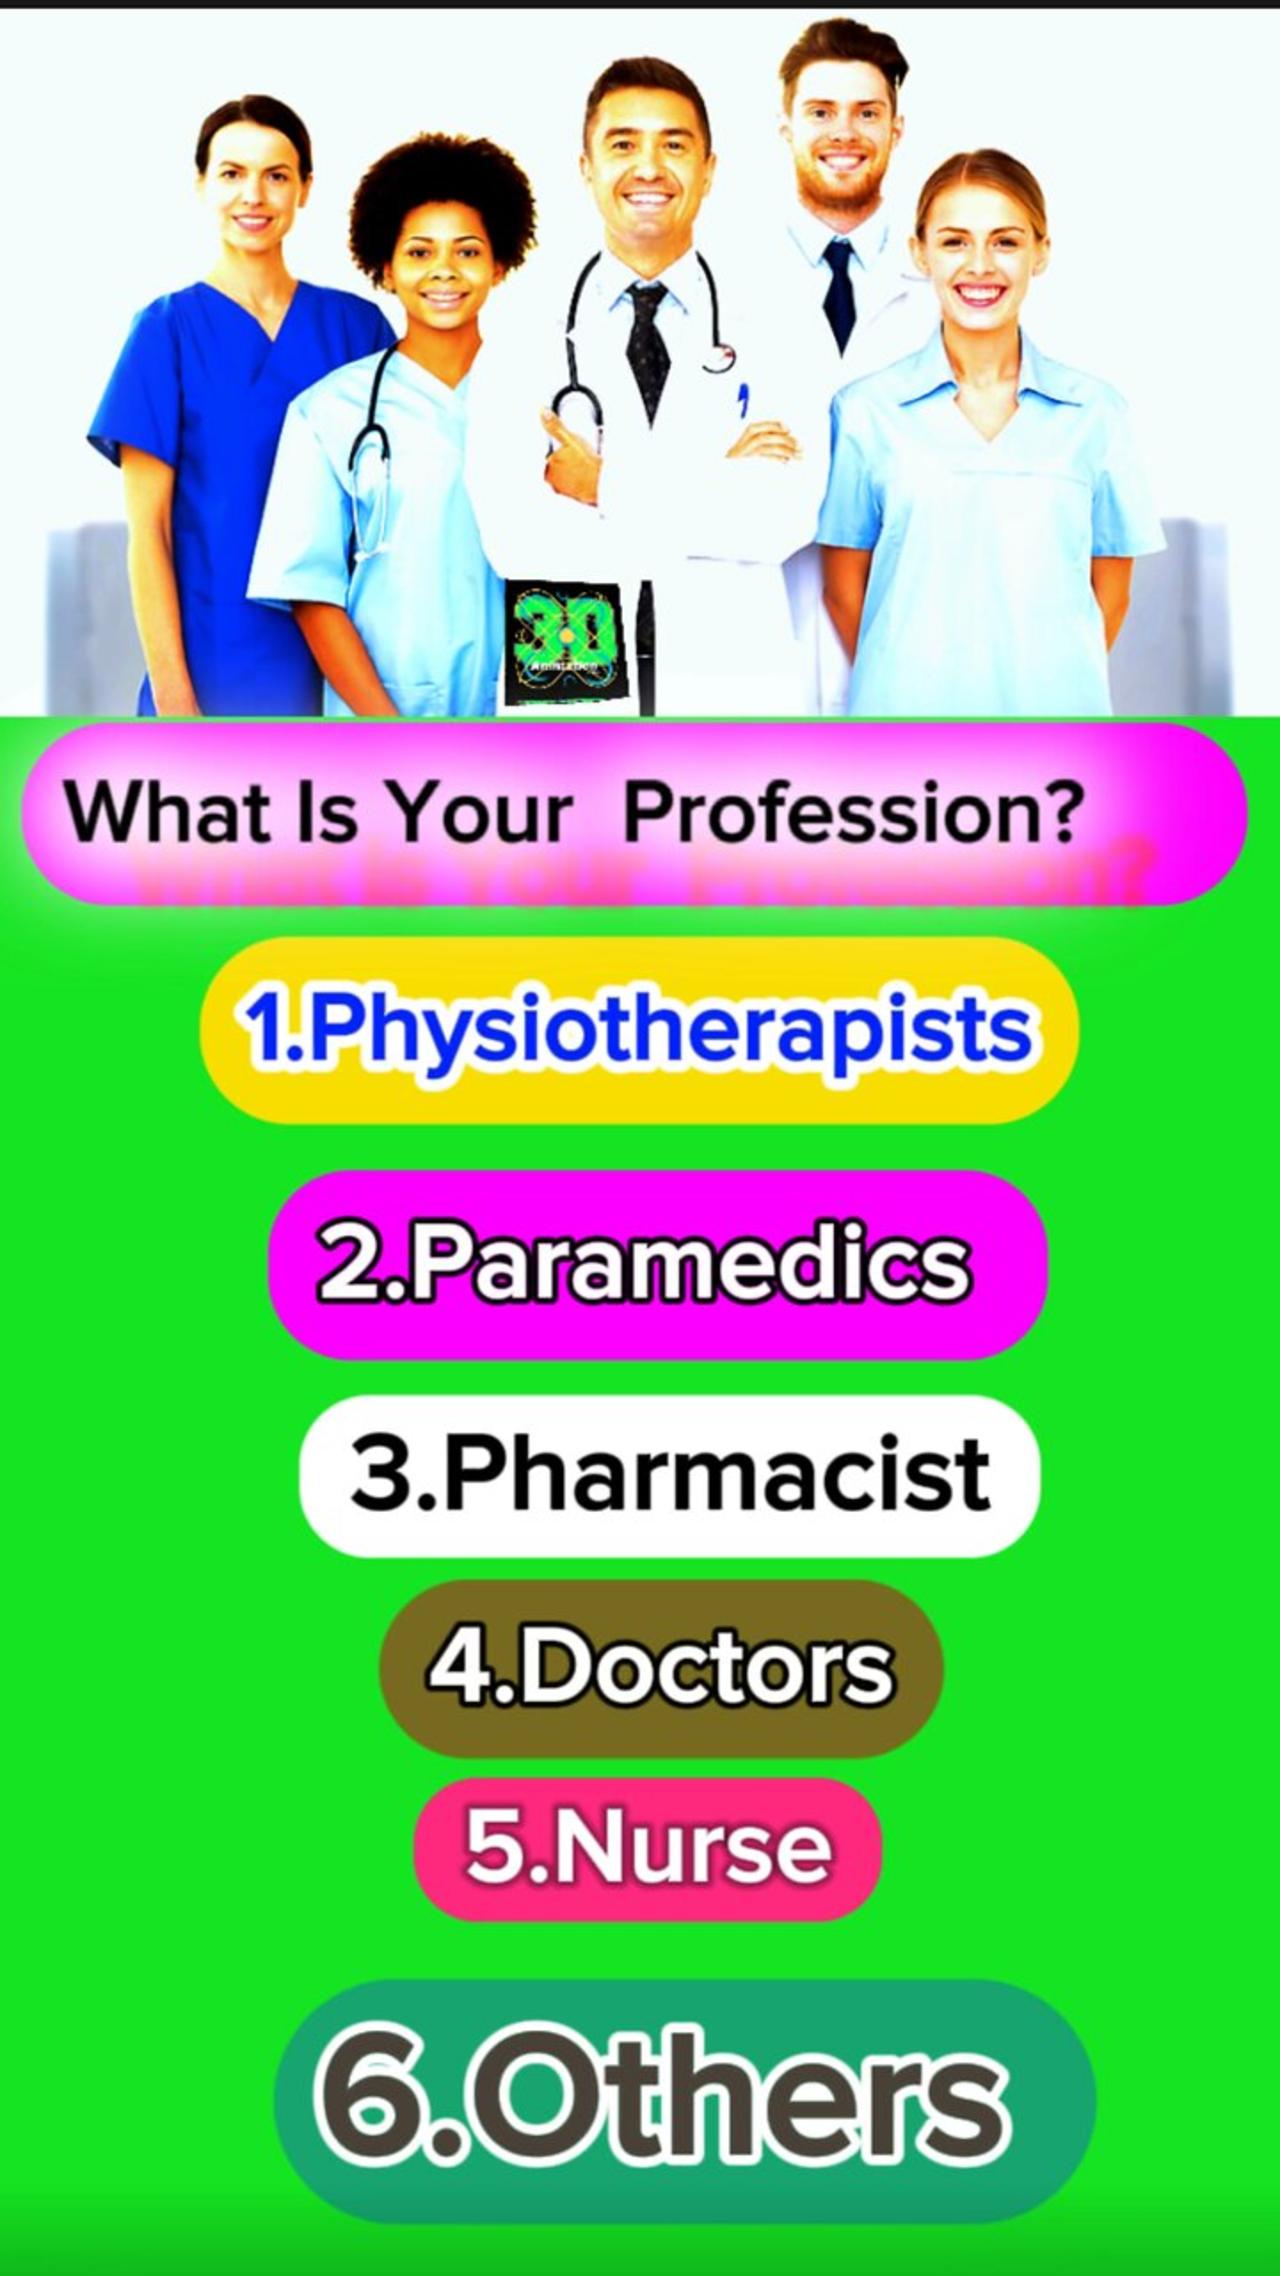 What is your profession comments #3dmedico